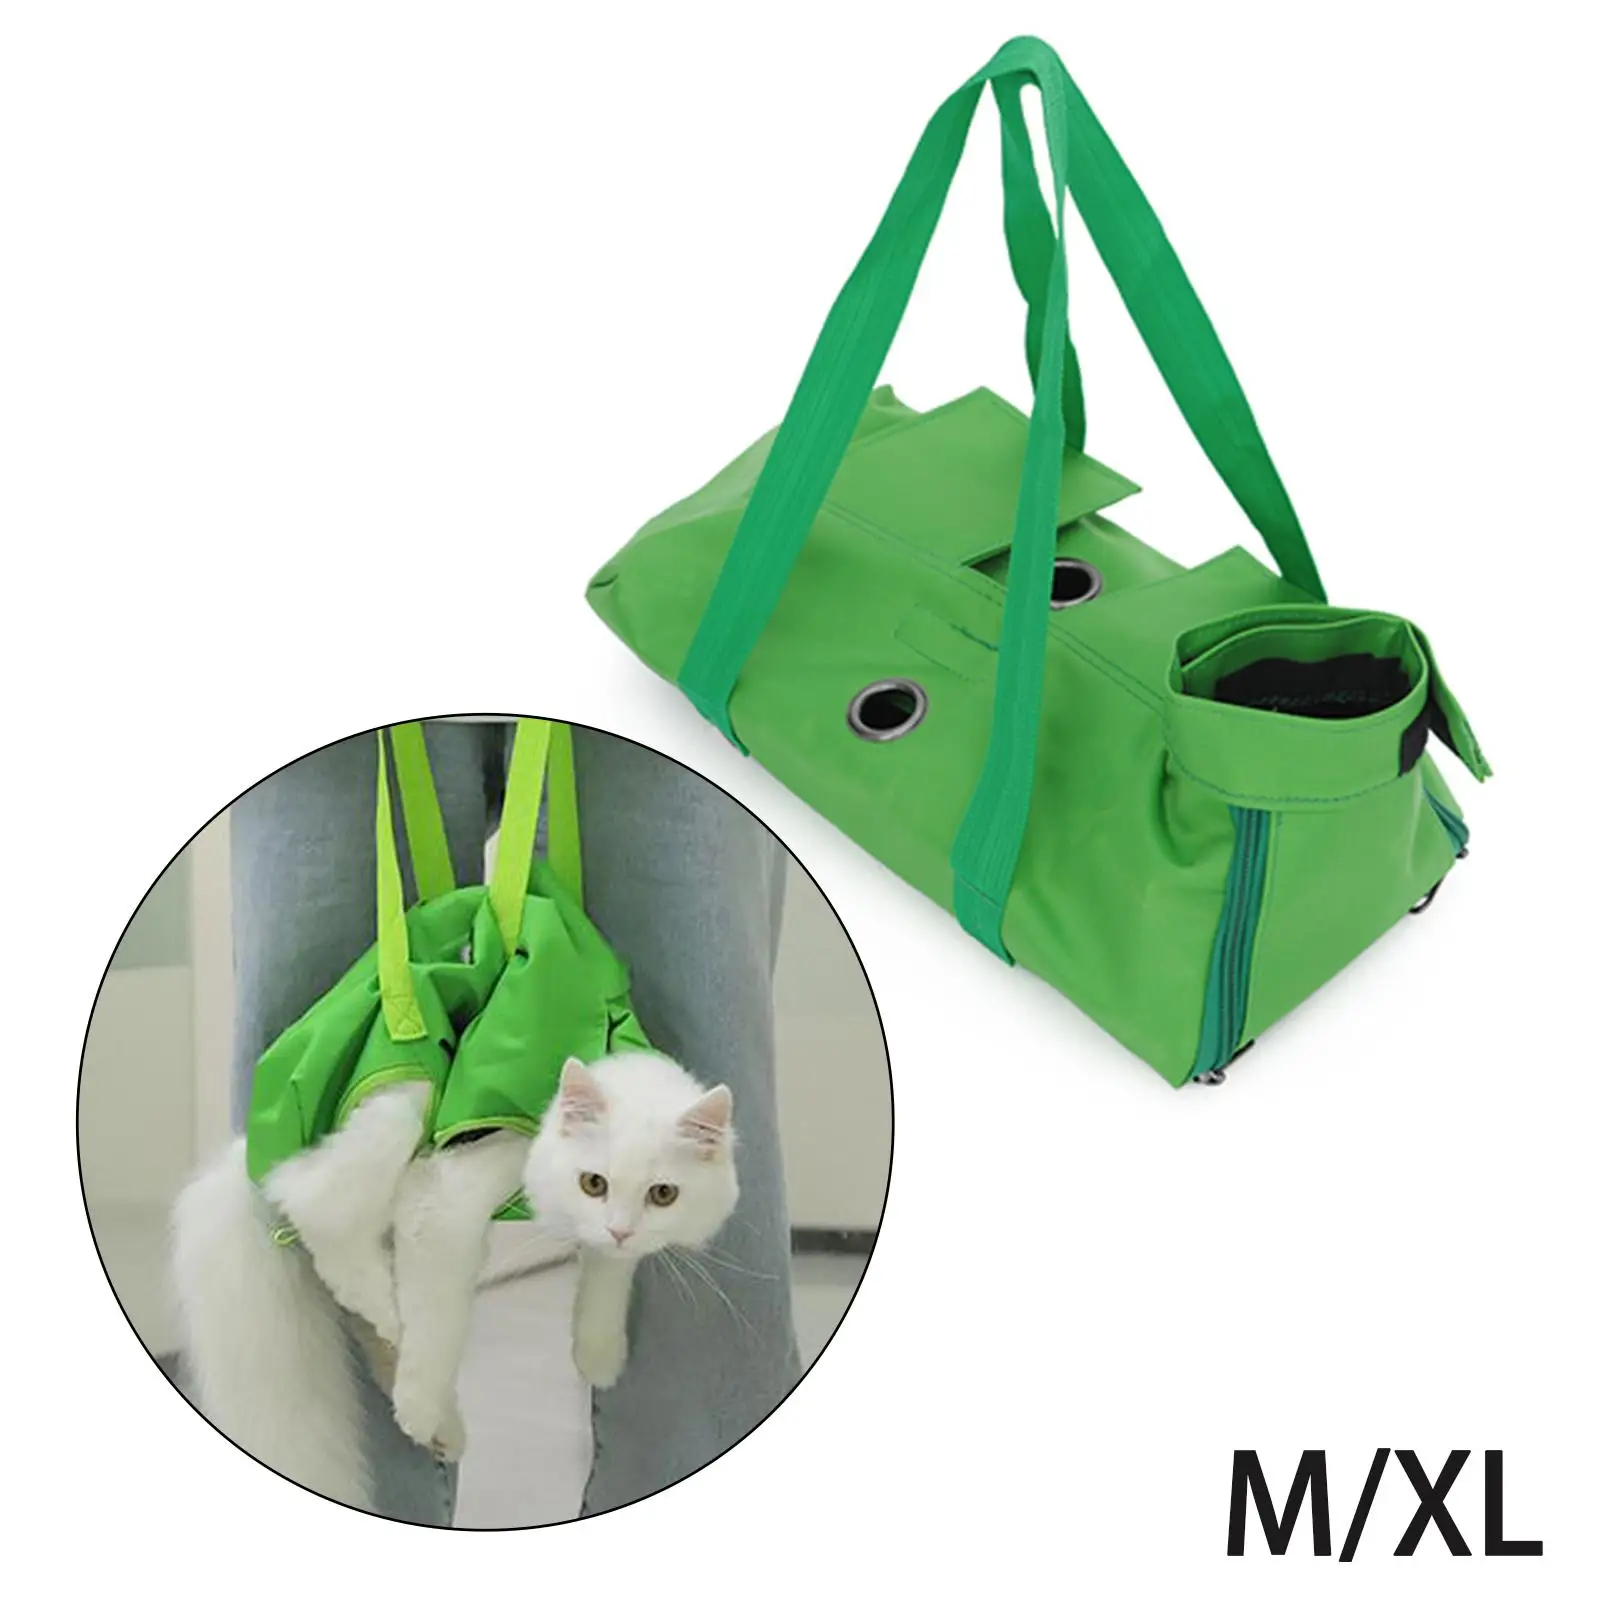 Cat Grooming Restraint Bag Adjustable Size Comfortable Anti Bite Carrying Bag for Claw Care Bathing Cleaning Travel Kitten Puppy